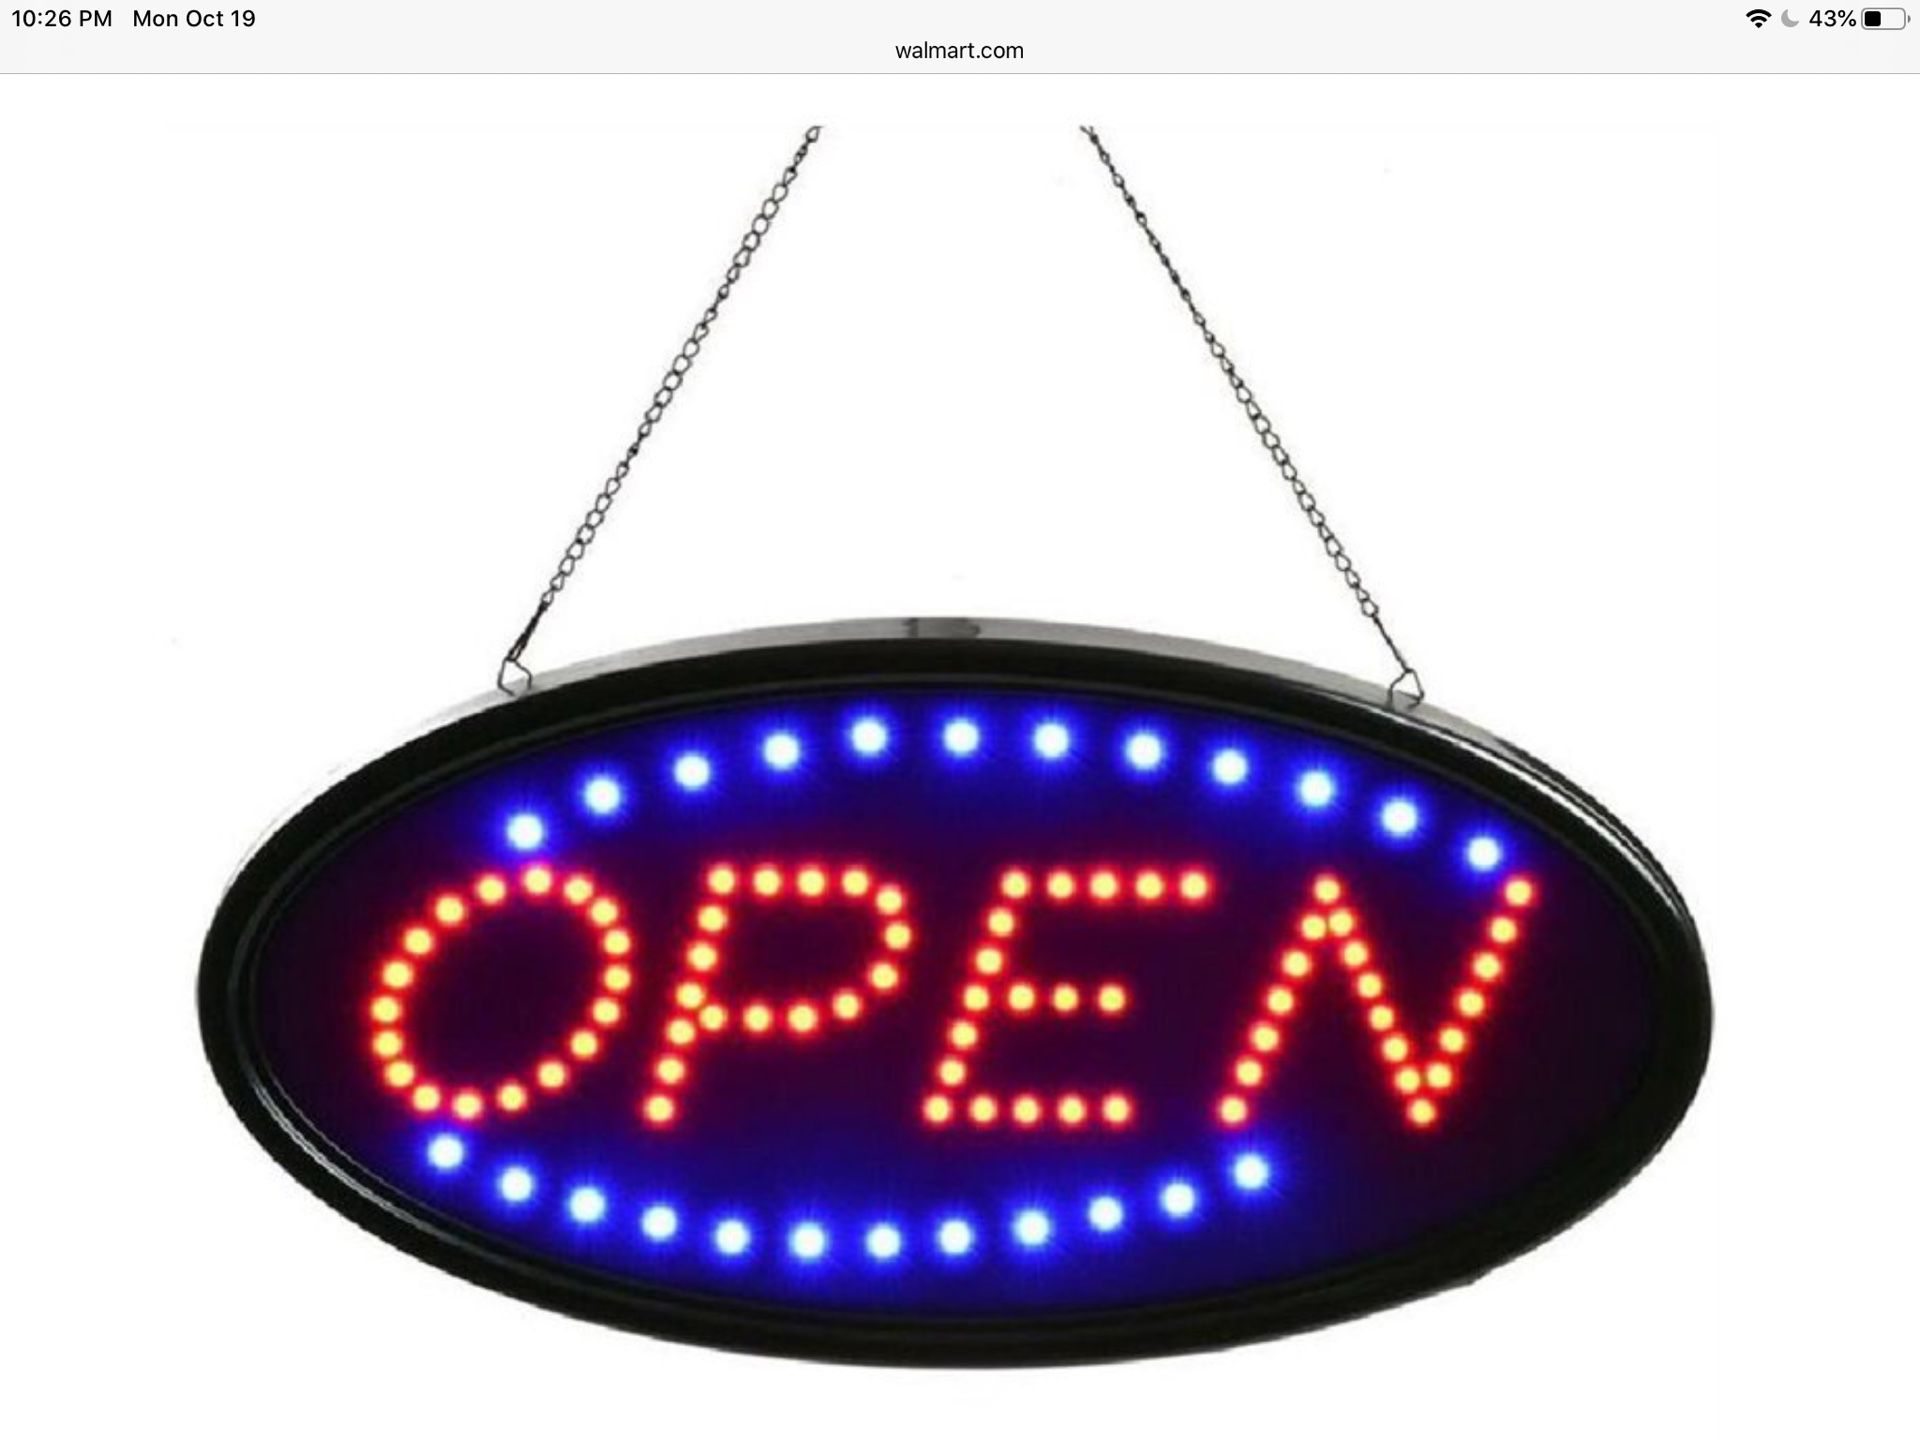 LED open sign